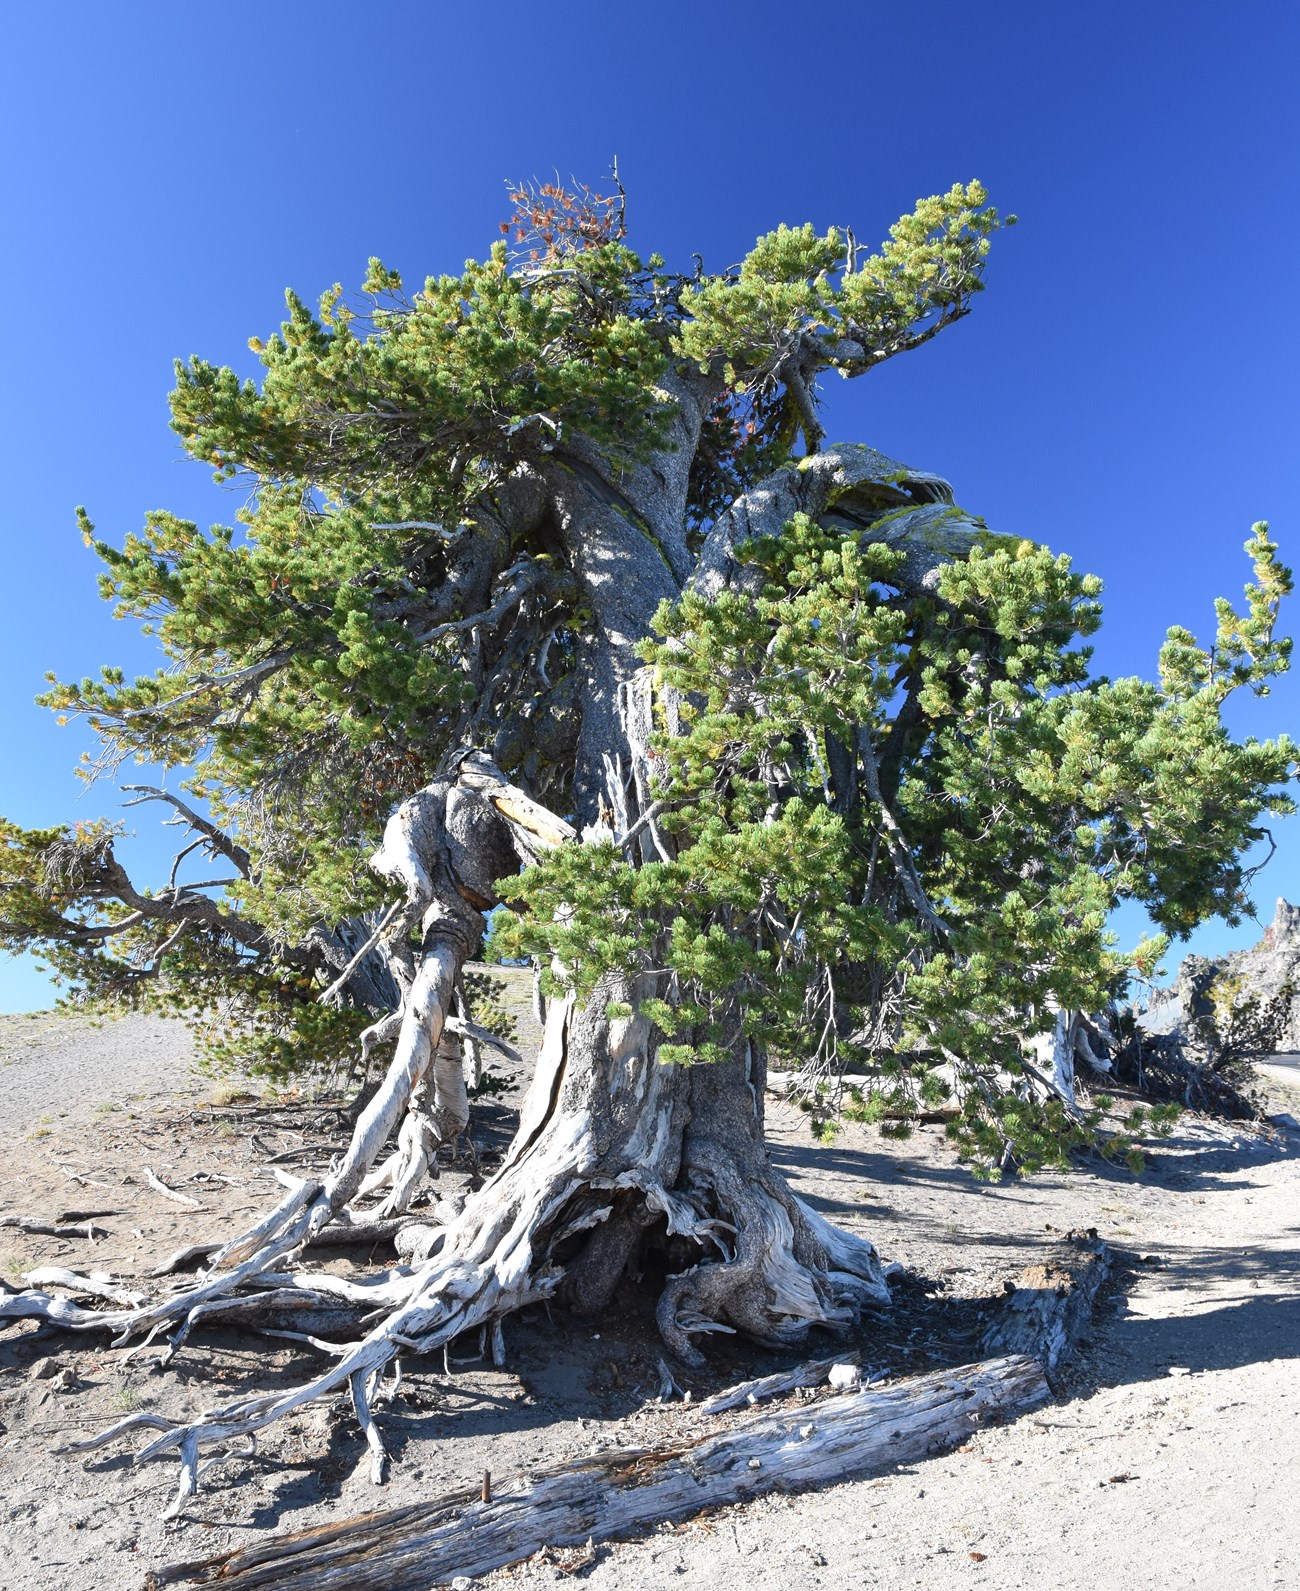 Old pine tree with large twisted trunk and green needles grows on a high ridge.